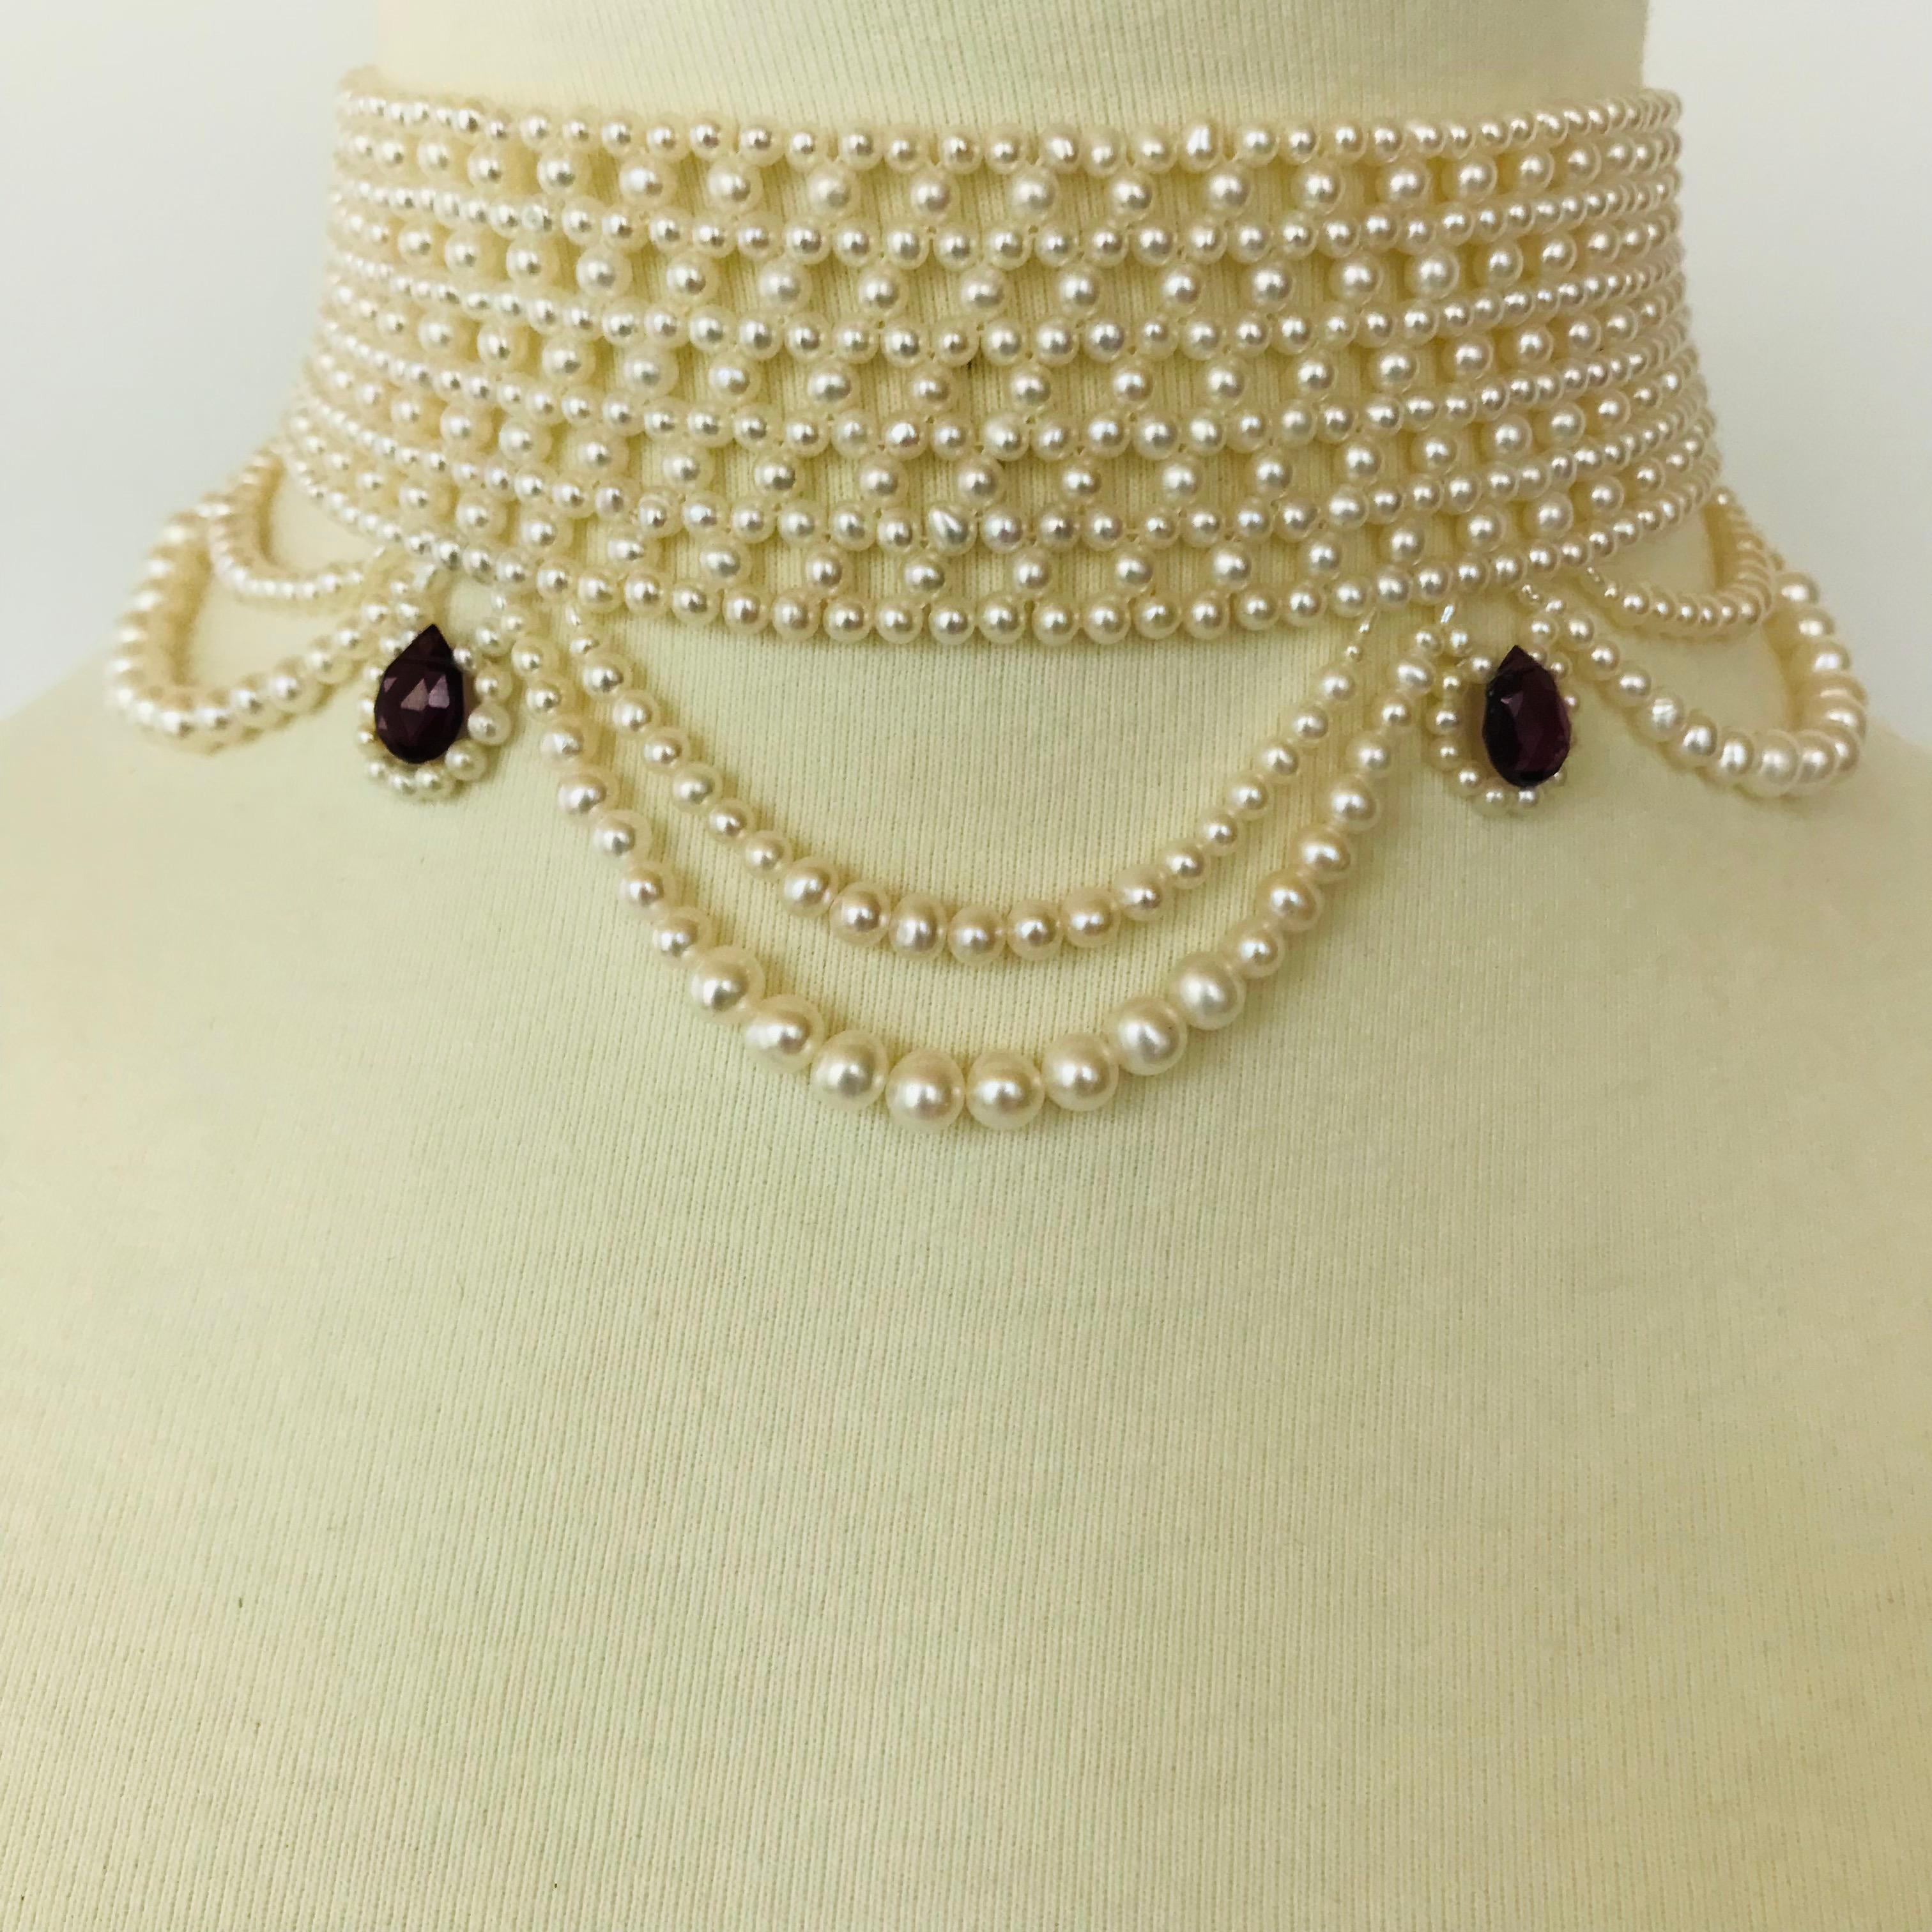 This stunning and romantic Woven Pearl Choker made of  2.5mm - 3 mm Cultured Pearls, is intricately handwoven to create a delicate lace-like design. The choker is tapered in design to fit along the curve of any neckline perfect;y. The graduated